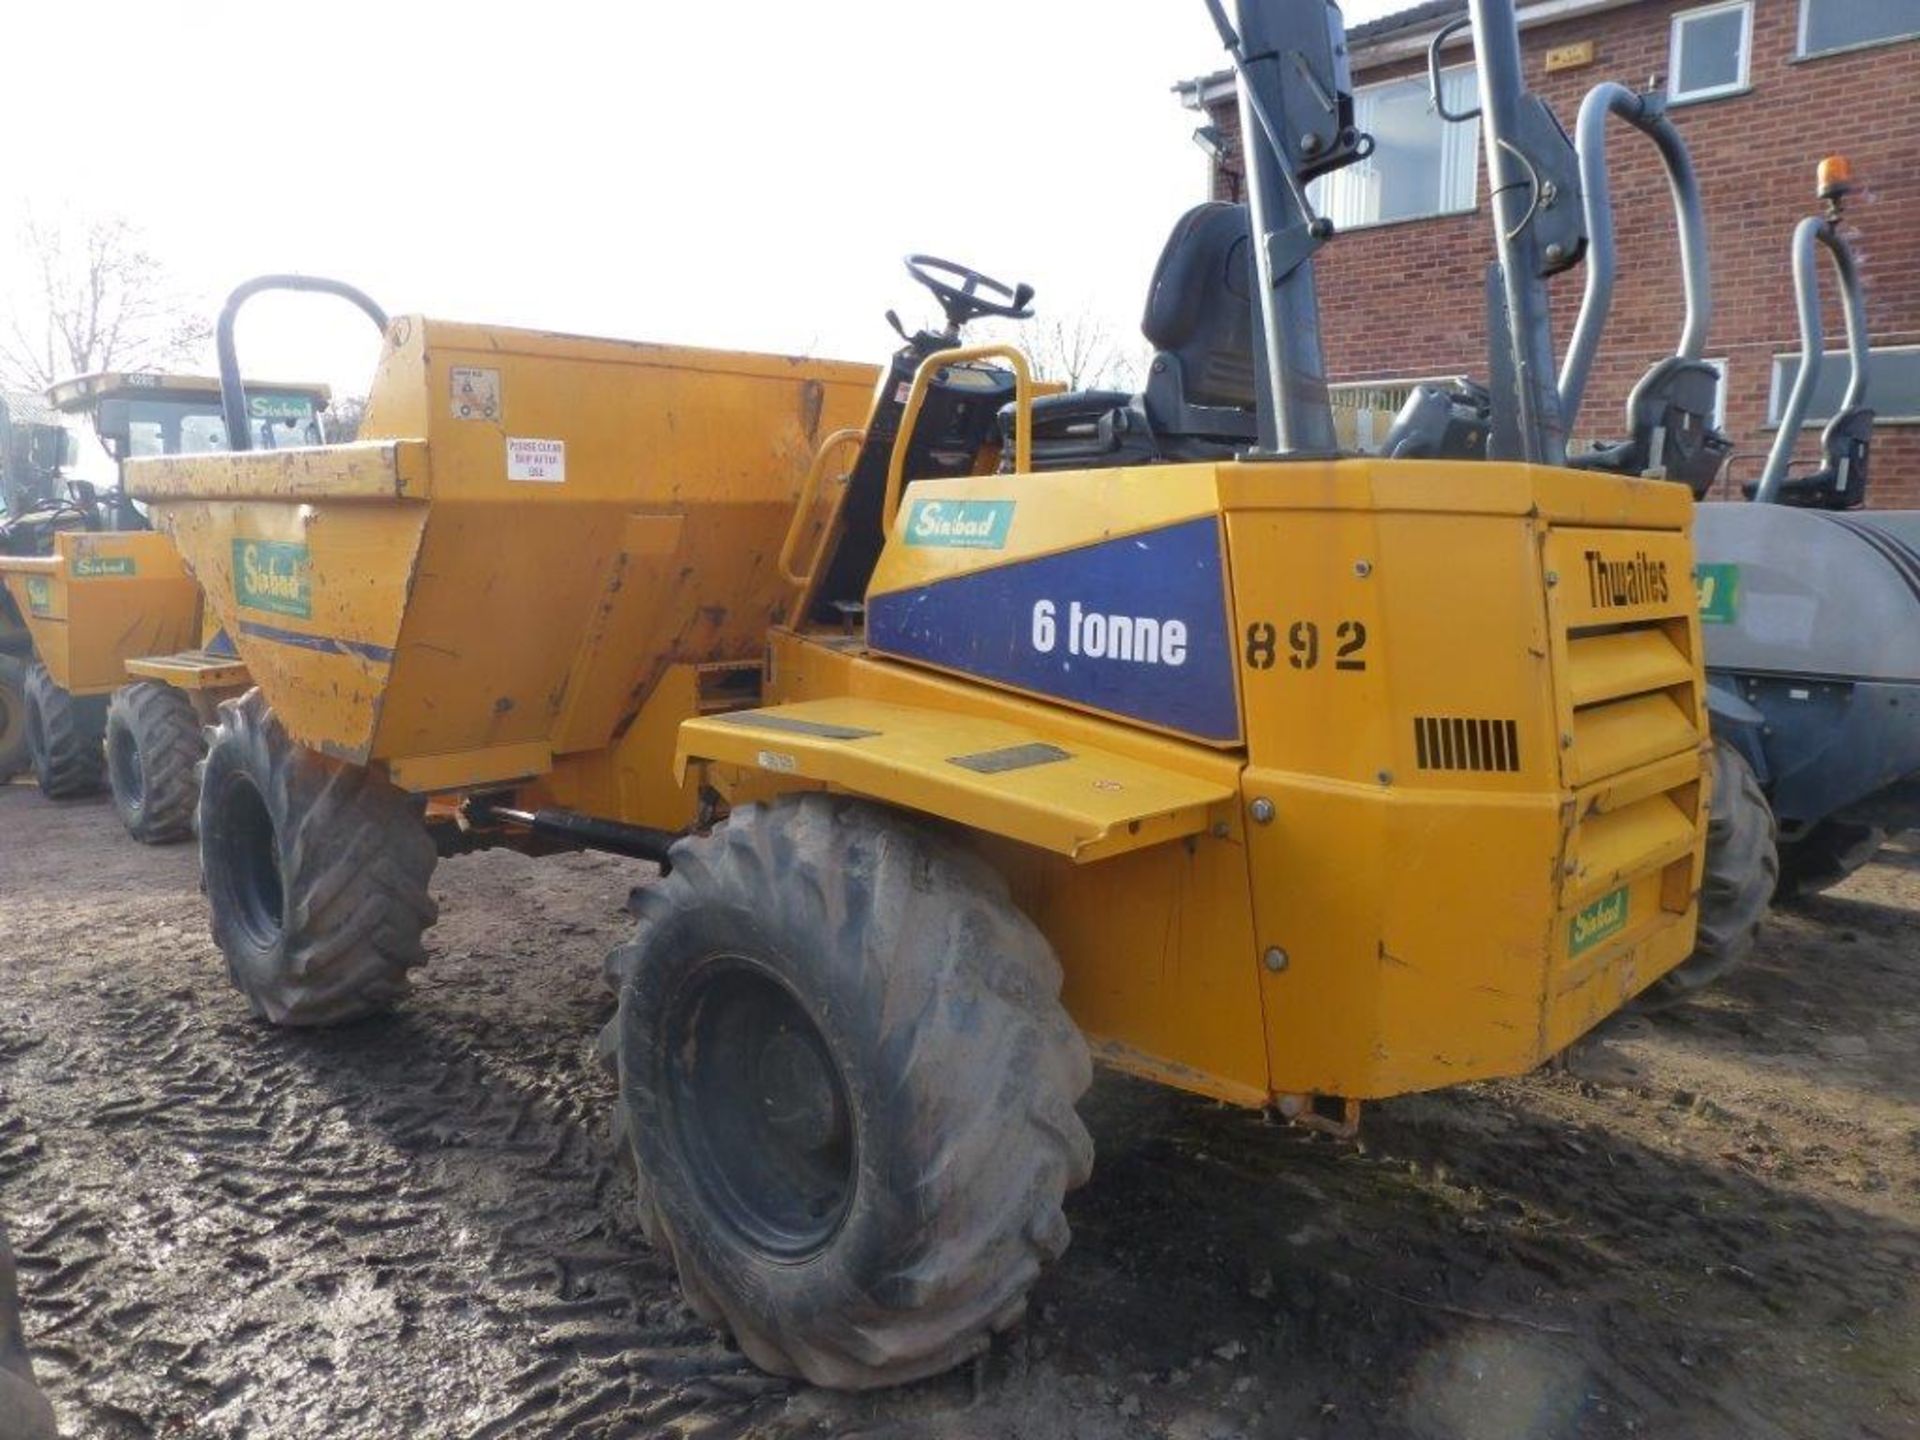 Thwaites 6-tonne 4x4 articulated dumper (2007), indicated hours 1533.1, weight 4160Kg, VIN no. - Image 3 of 6